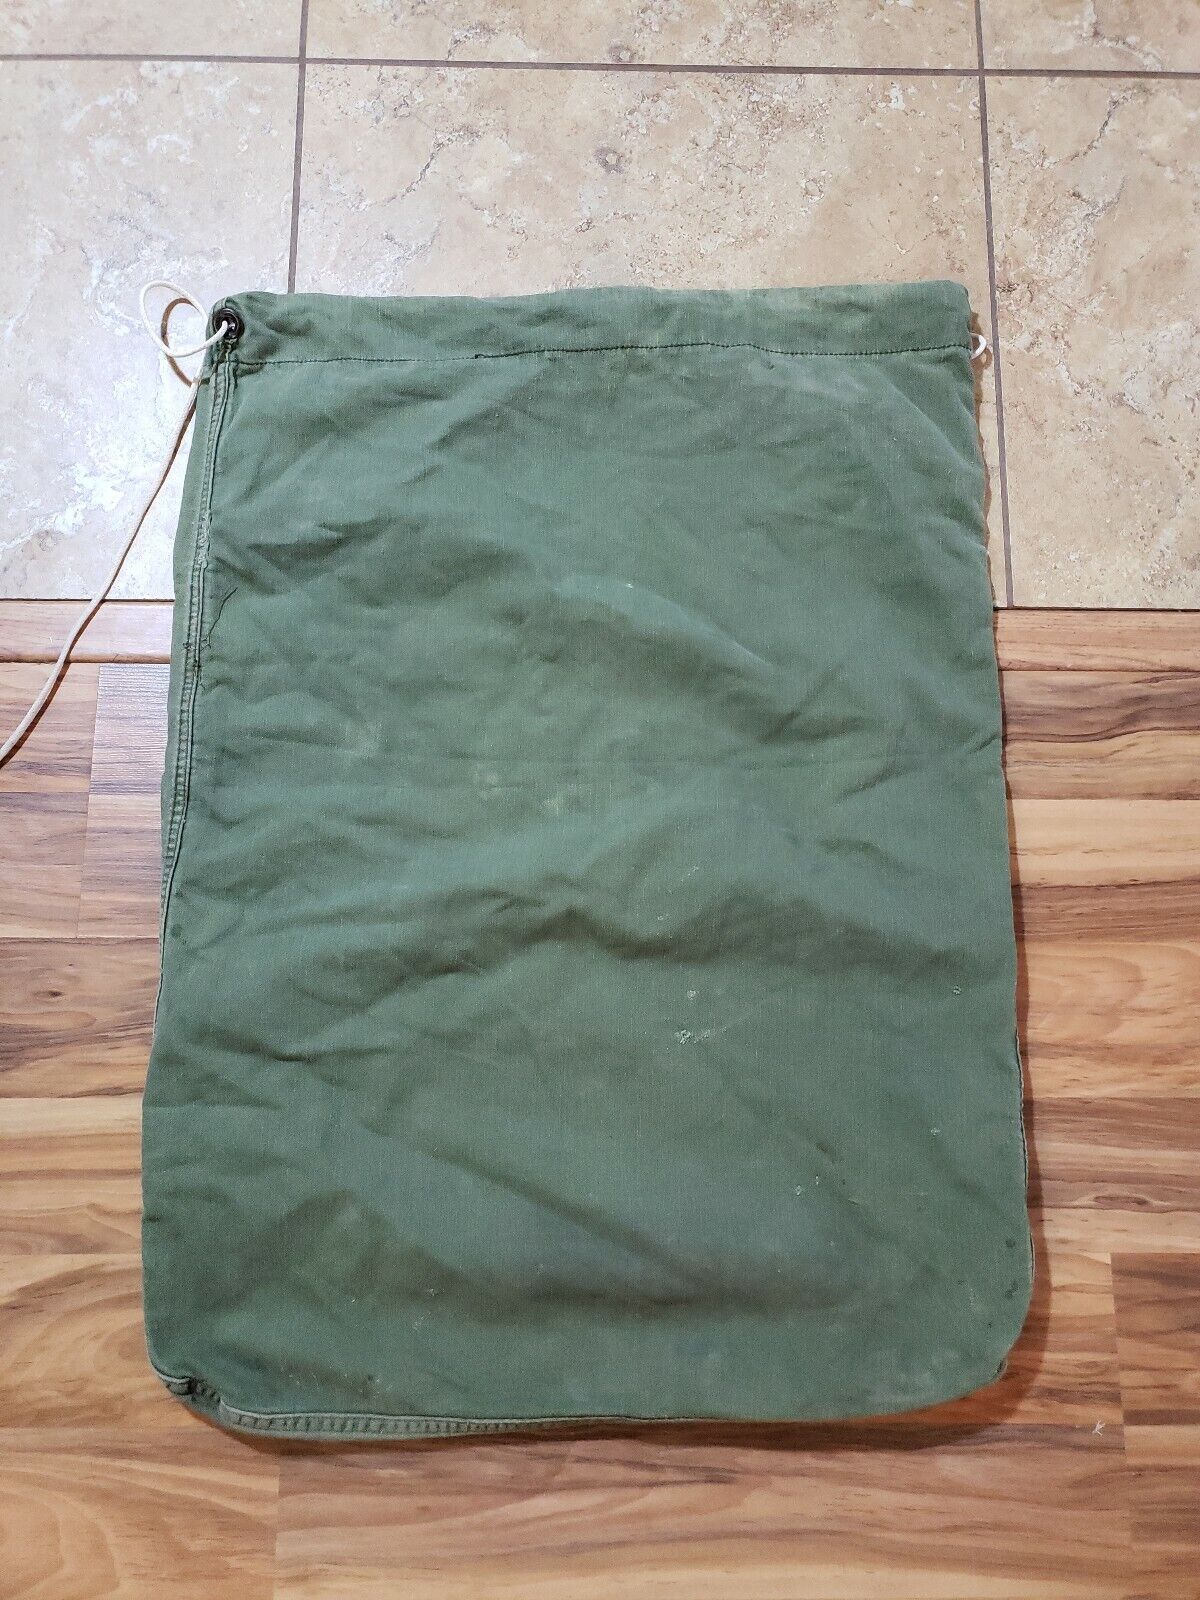 Vtg US Army Military Issue Olive Drab Cotton Barracks Laundry Bag Faded 21x30